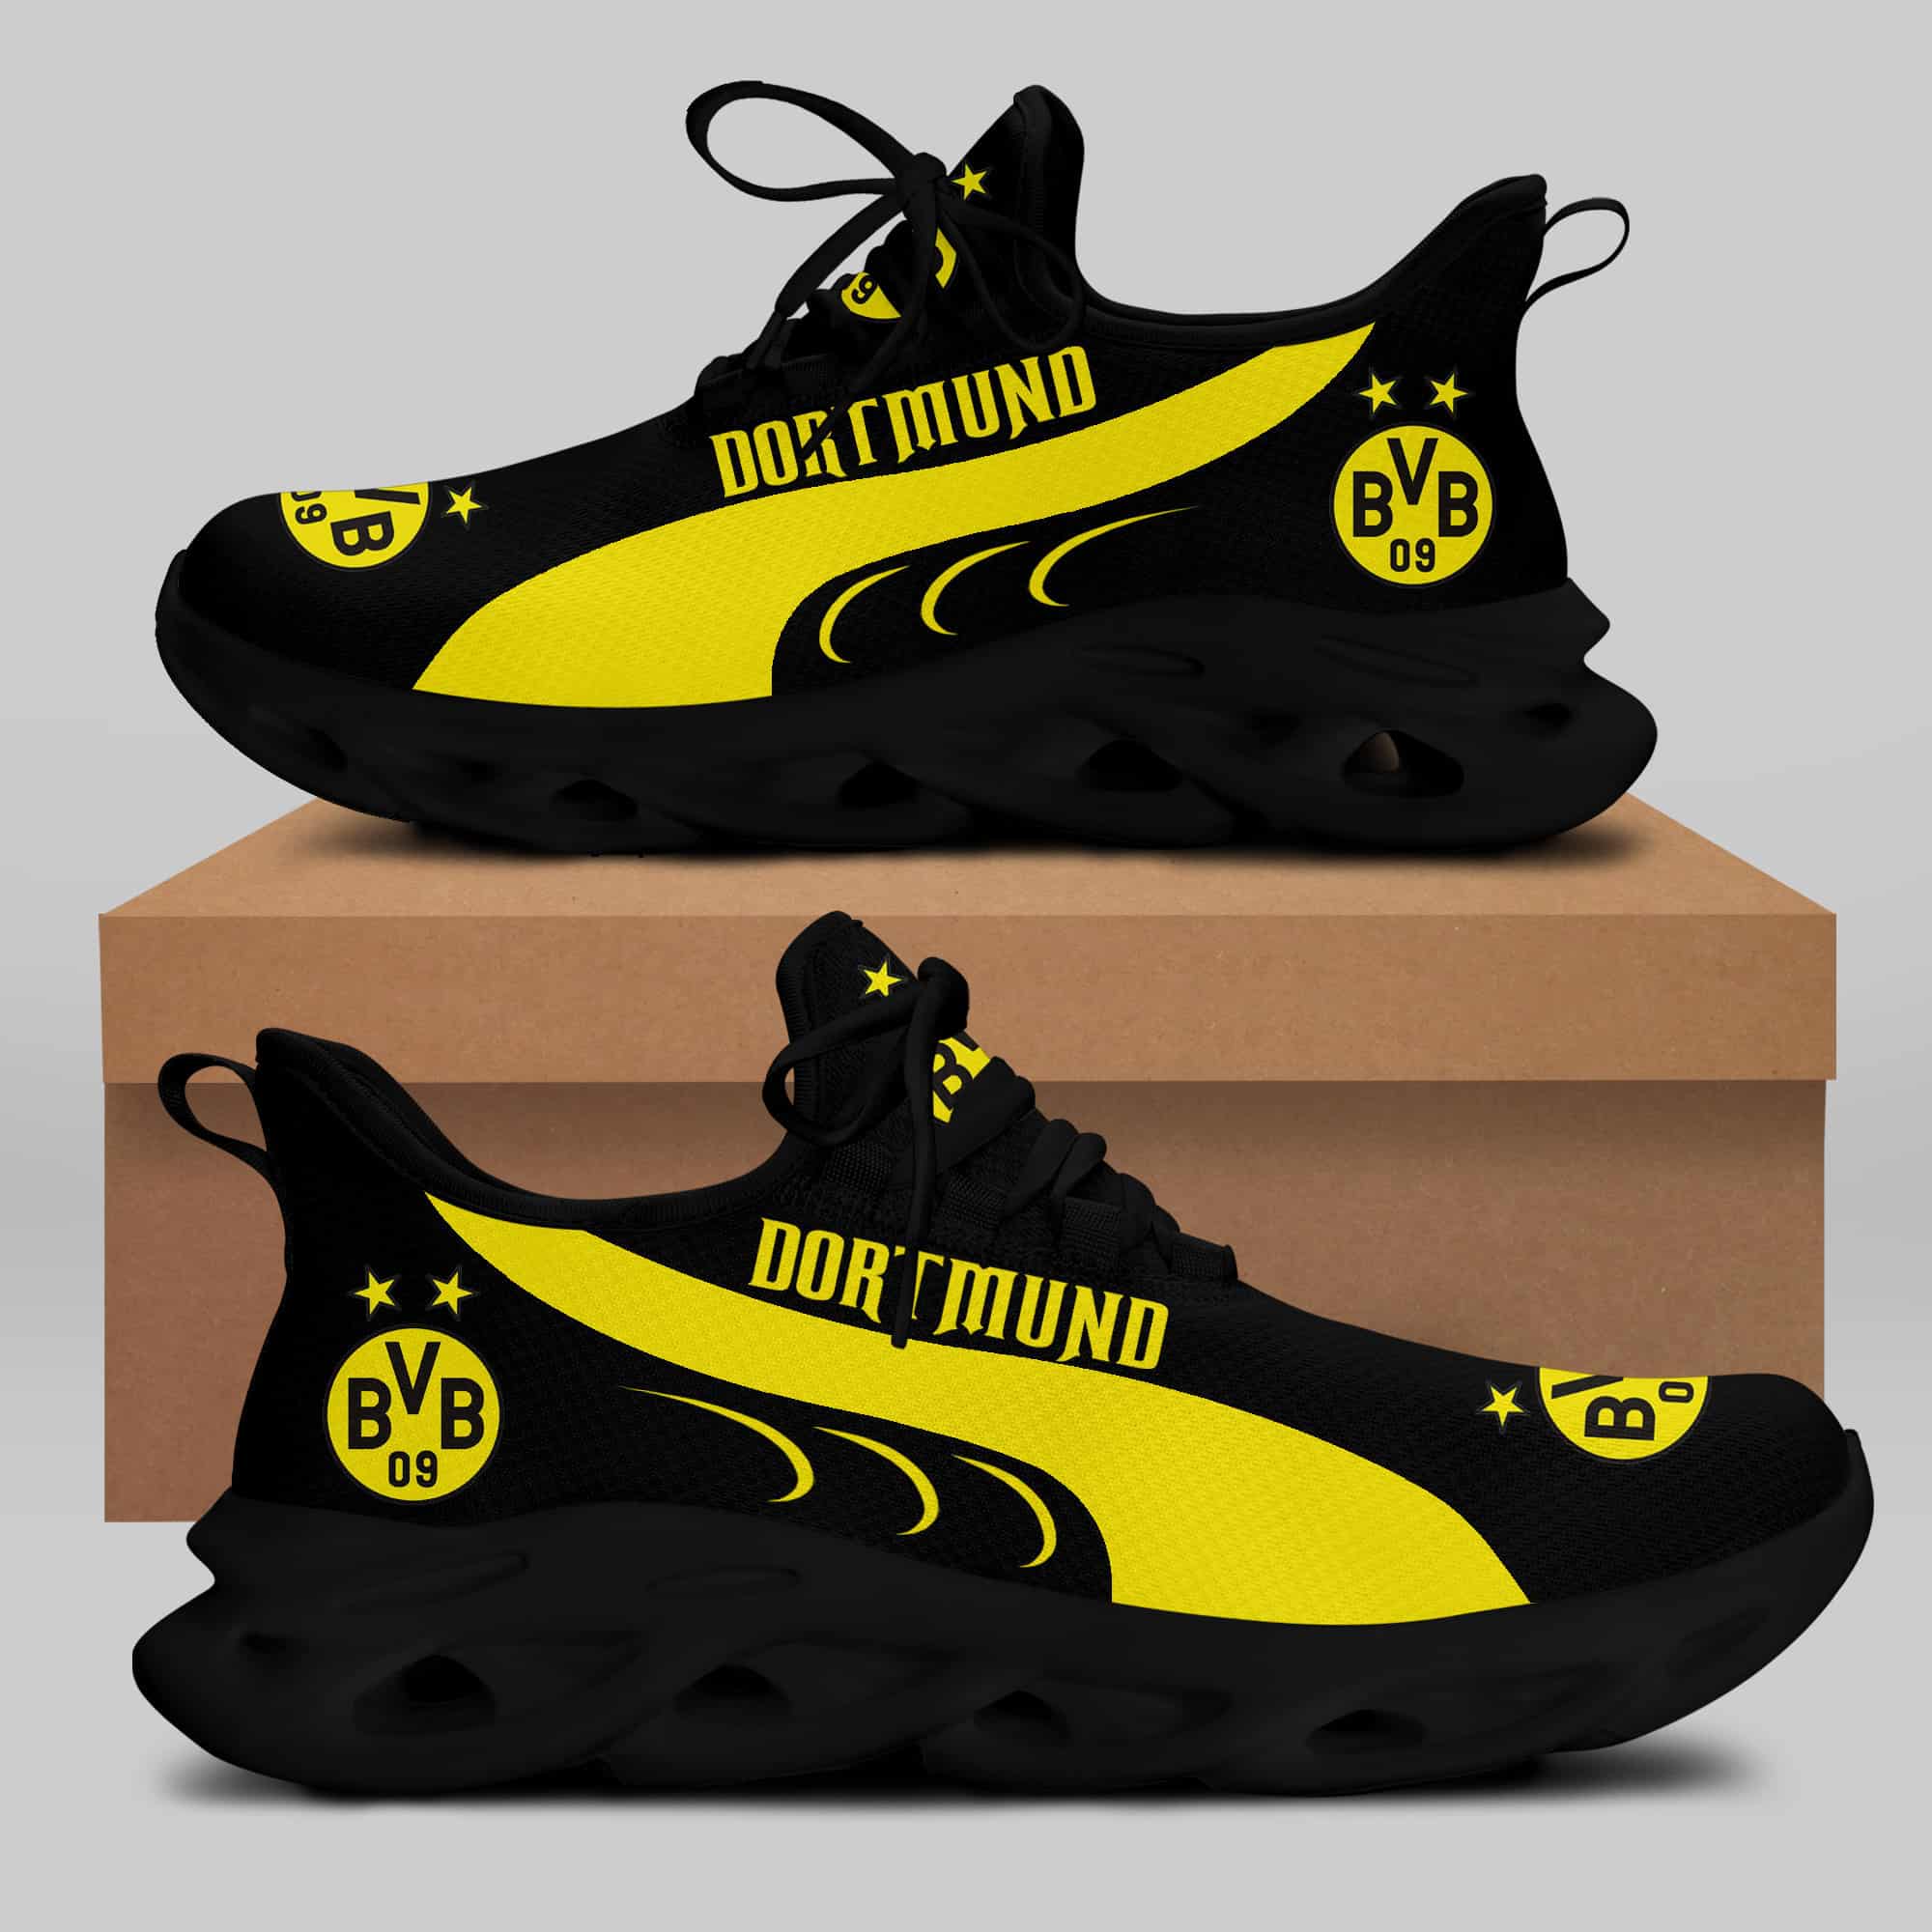 Borussia Dortmund Running Shoes Max Soul Shoes Sneakers Ver 4 1